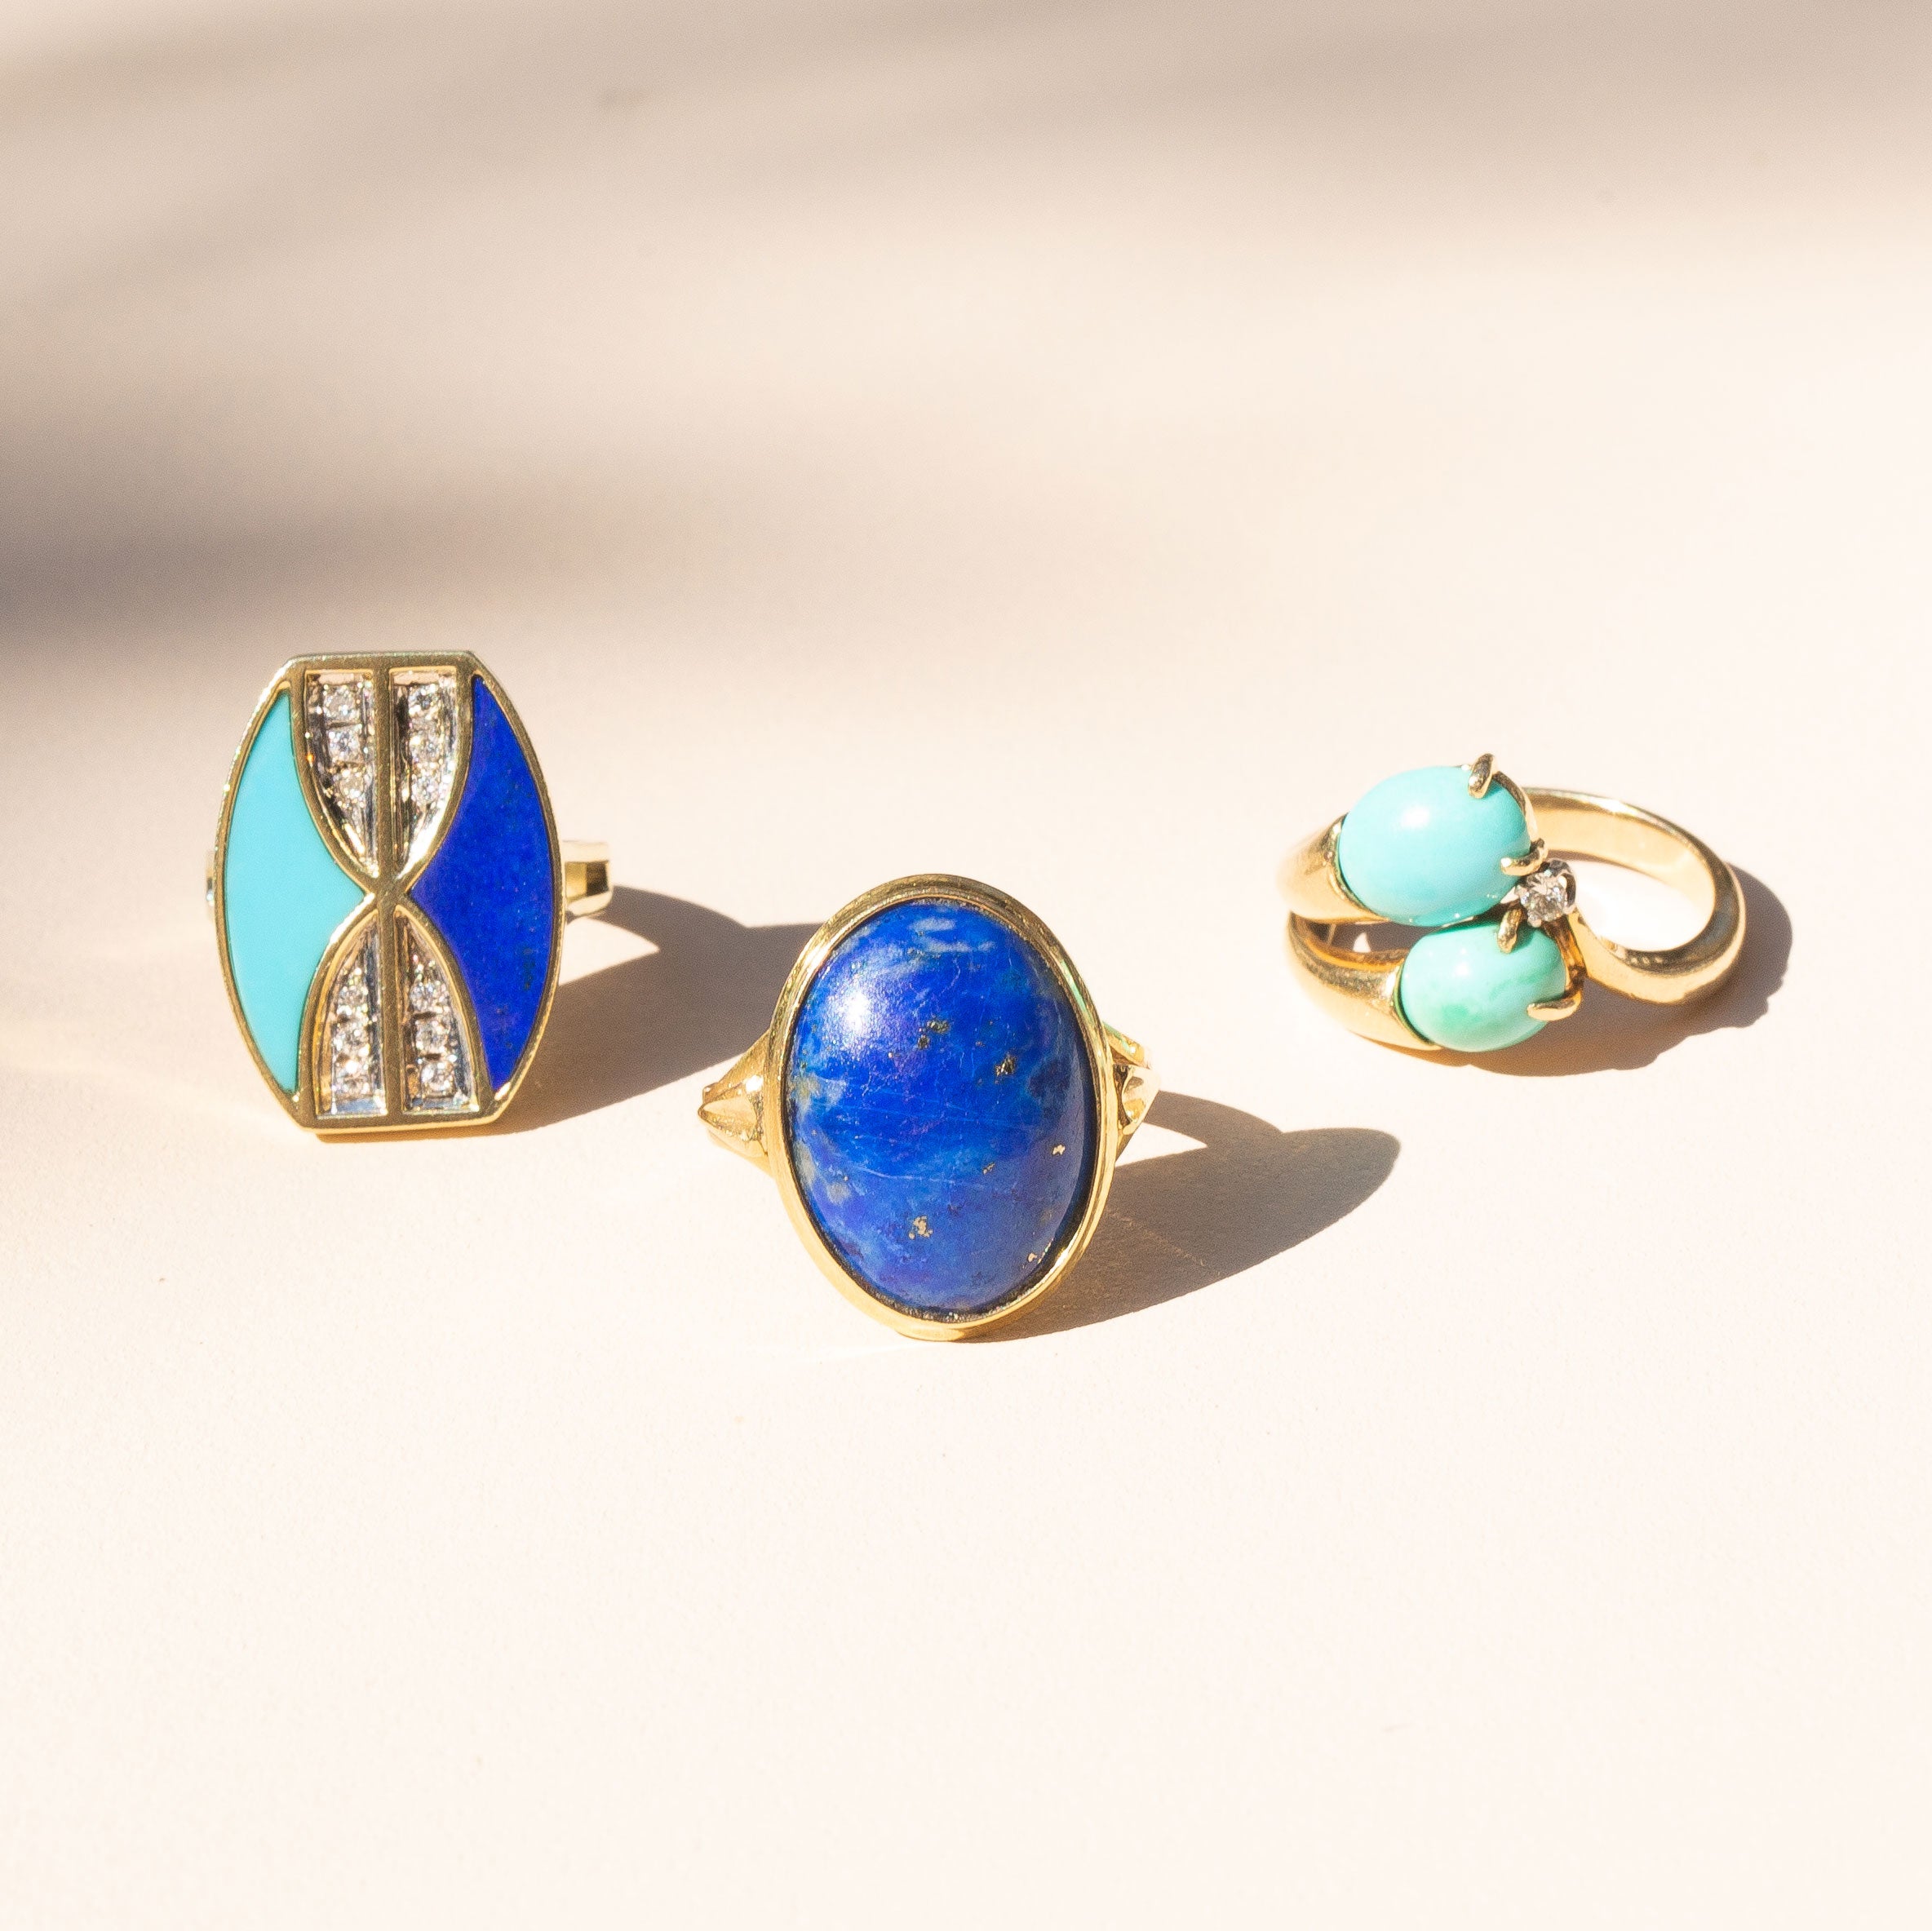 Modernist Lapis, Turquoise, and Diamond 14K Gold Ring